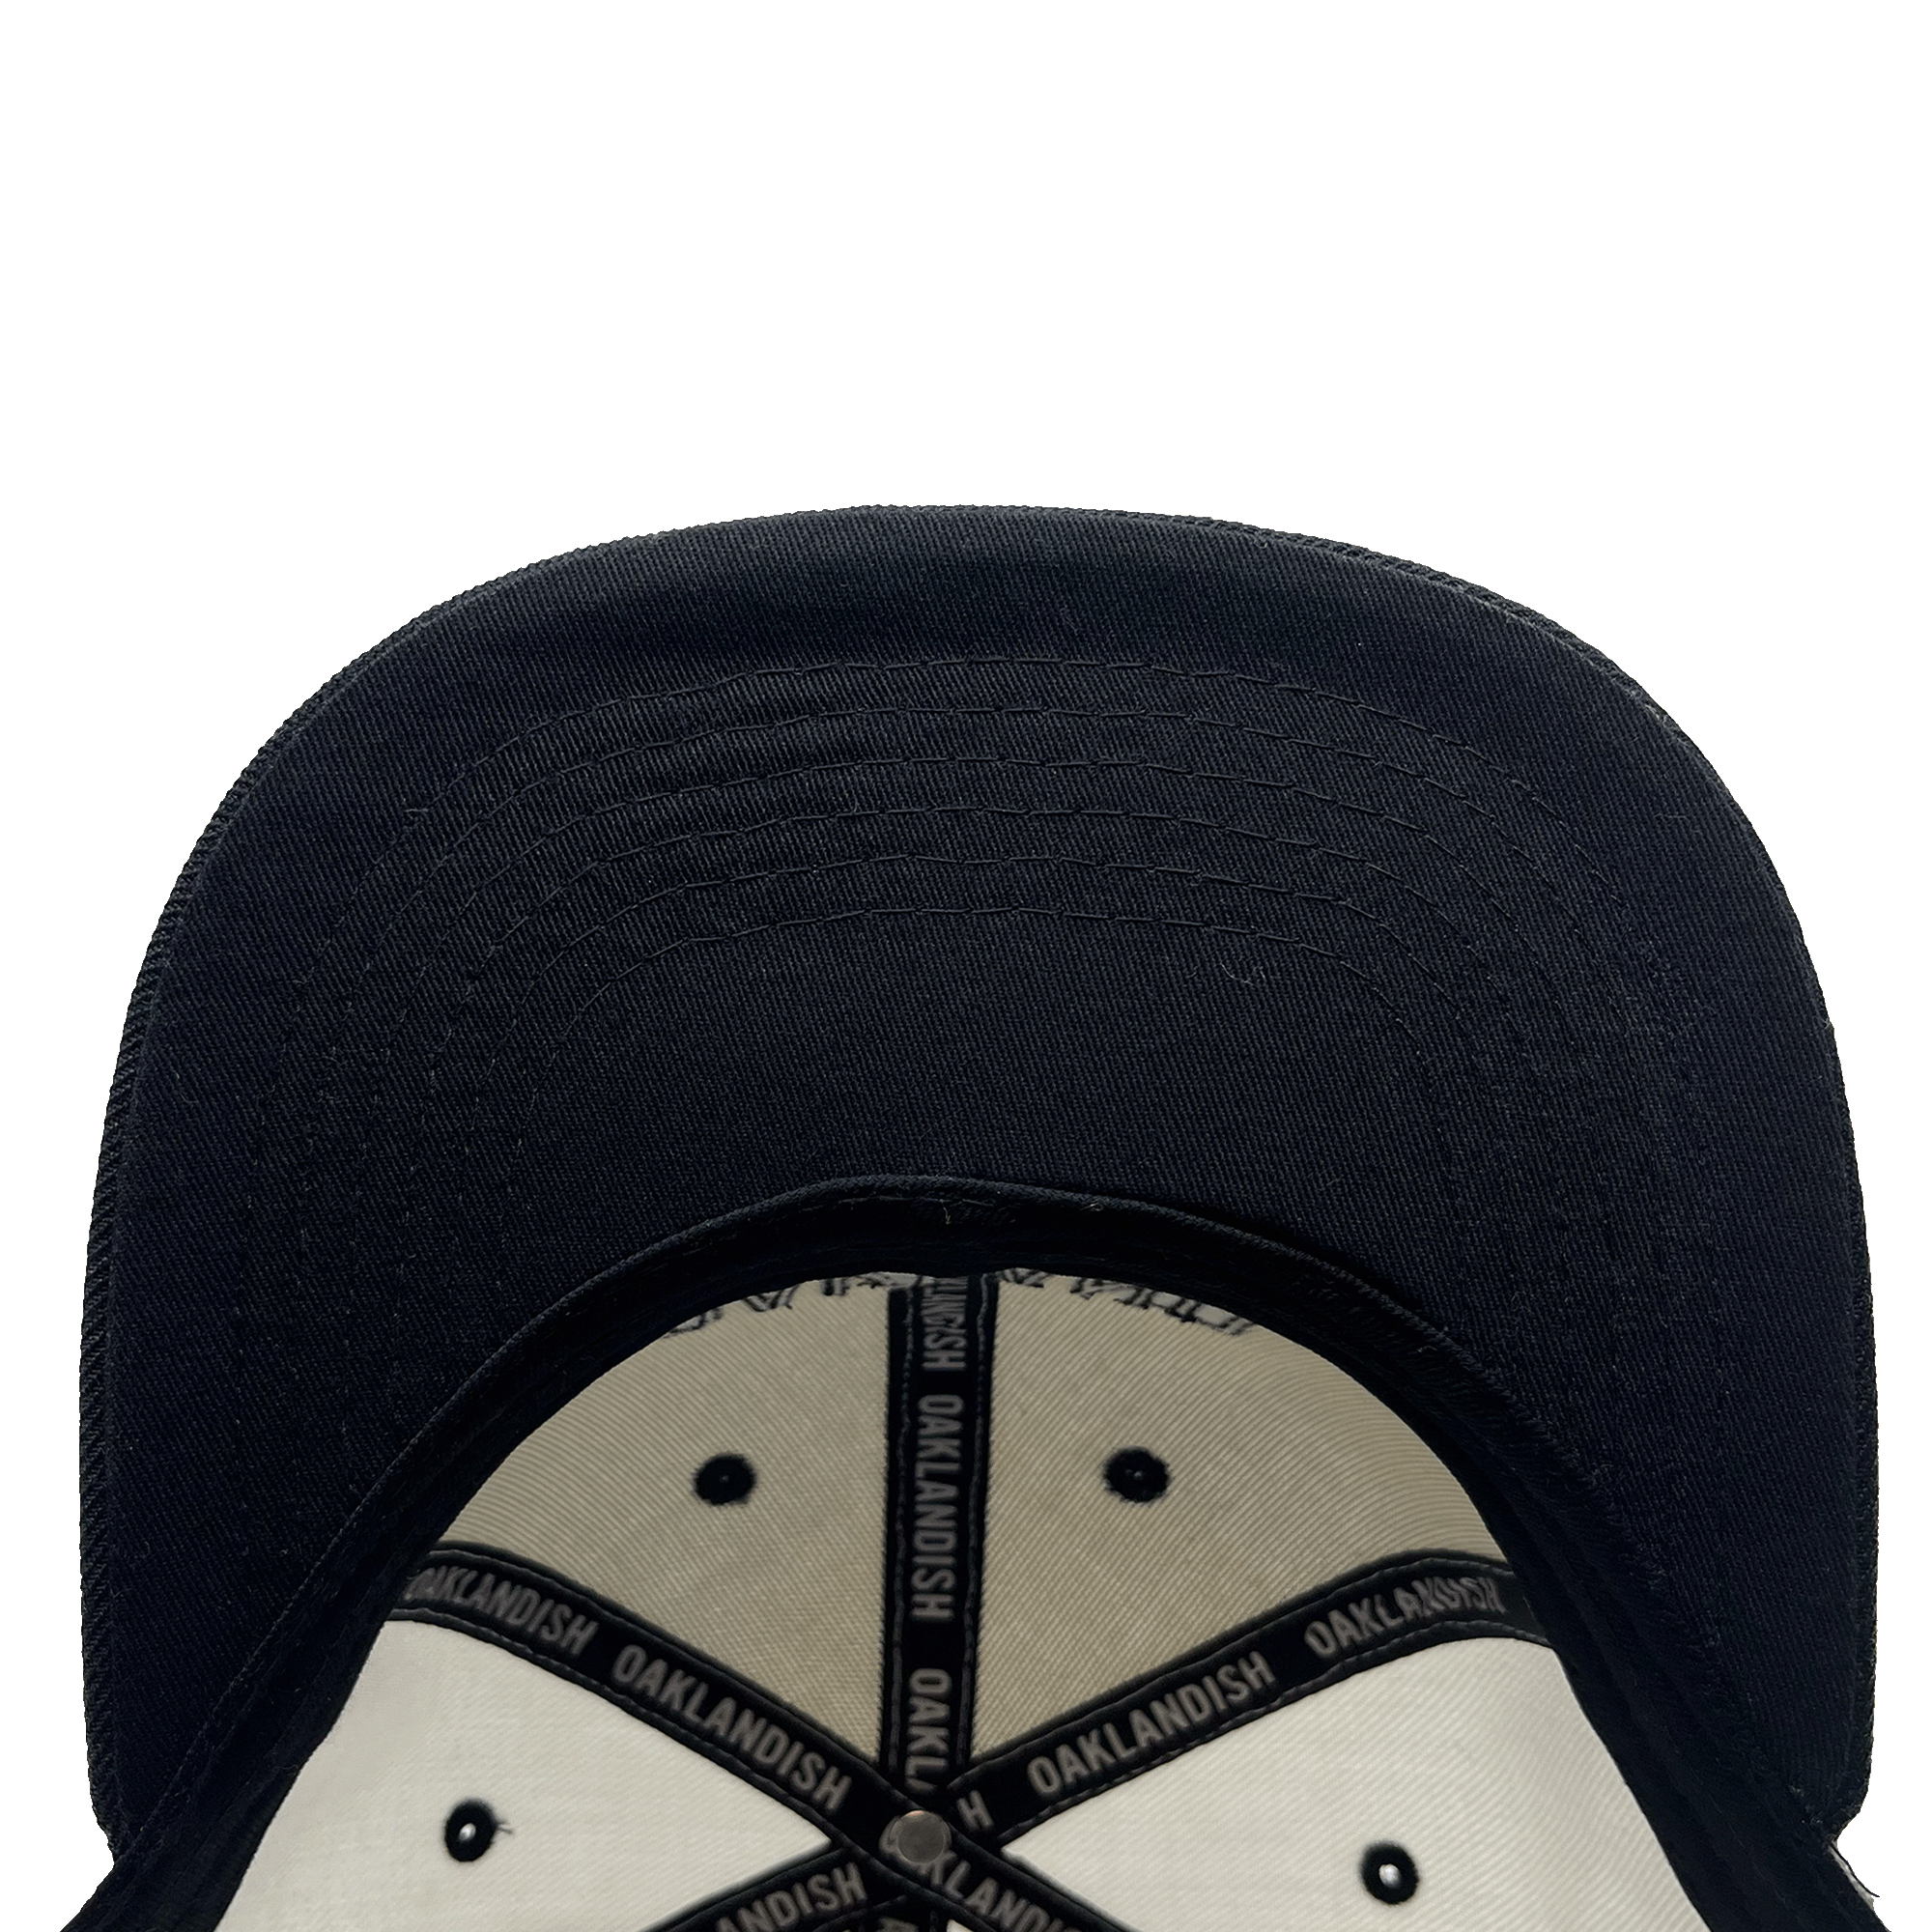 Underside view of flat, square bill on a white snapback hat.